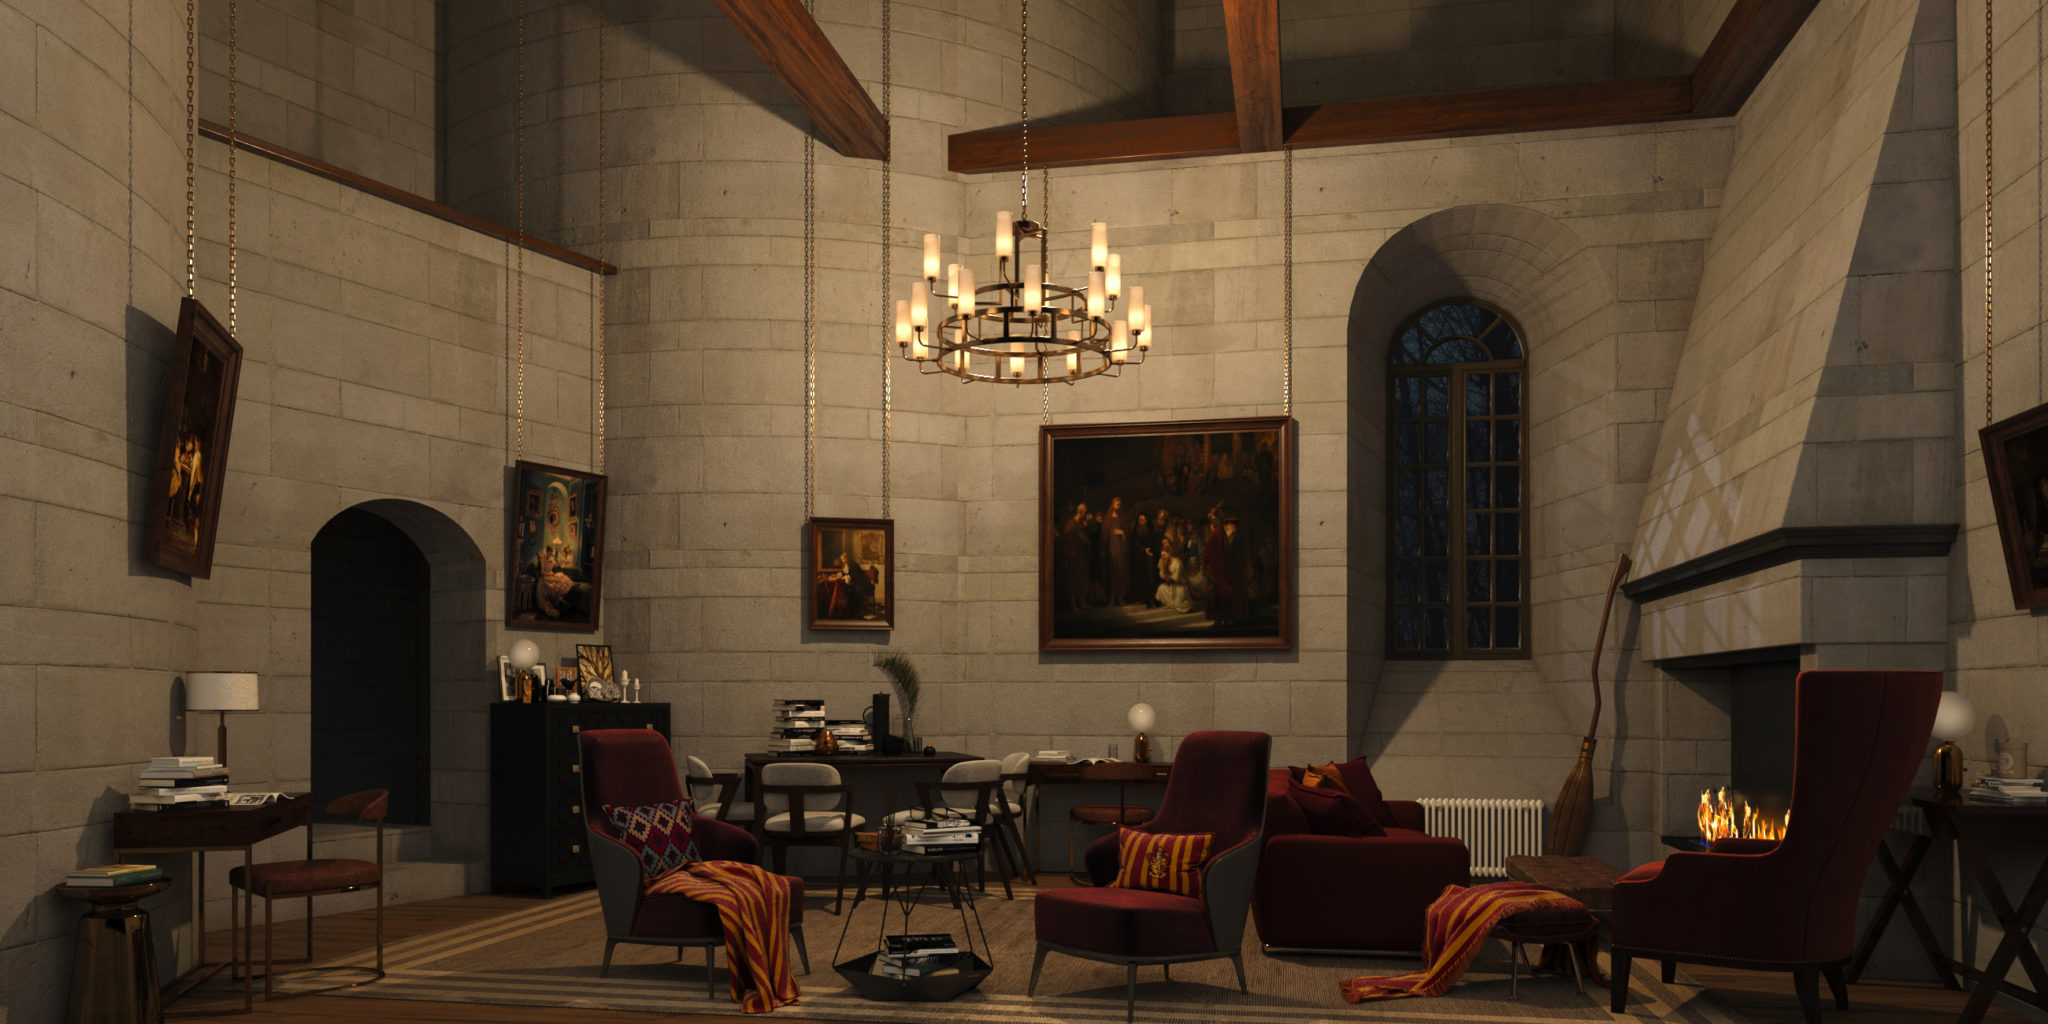 The Gryffindor Common Room Gets a Modern Redesign! | LaptrinhX / News